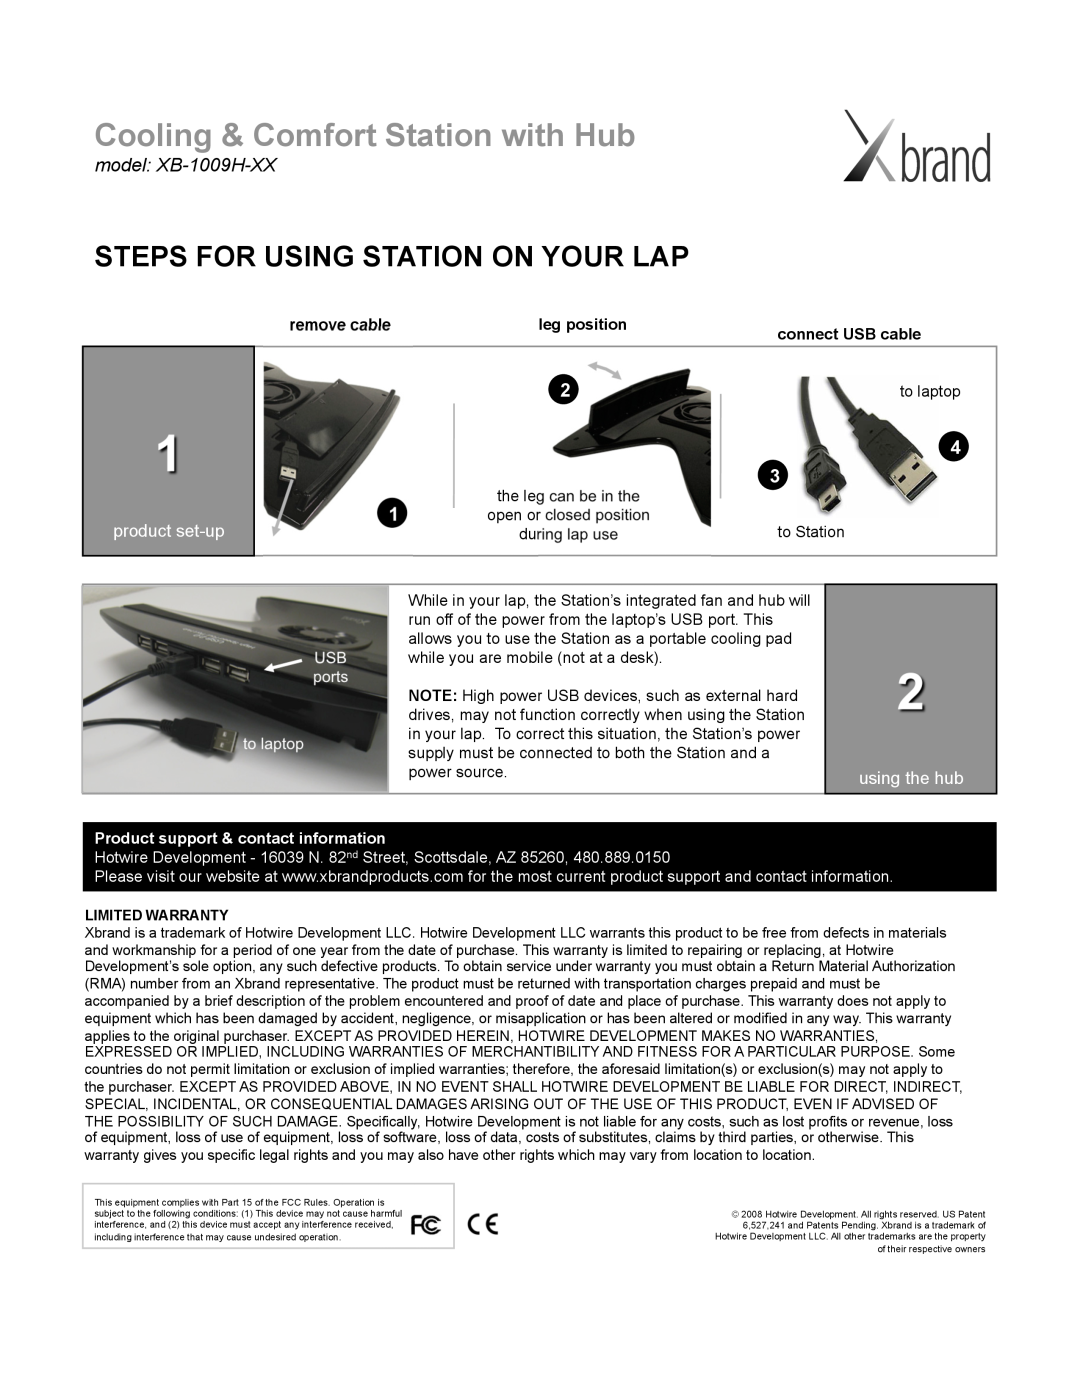 Xbrand XB-1009H-XX Steps For Using Station On Your Lap, remove cable, leg position, Product support & contact information 